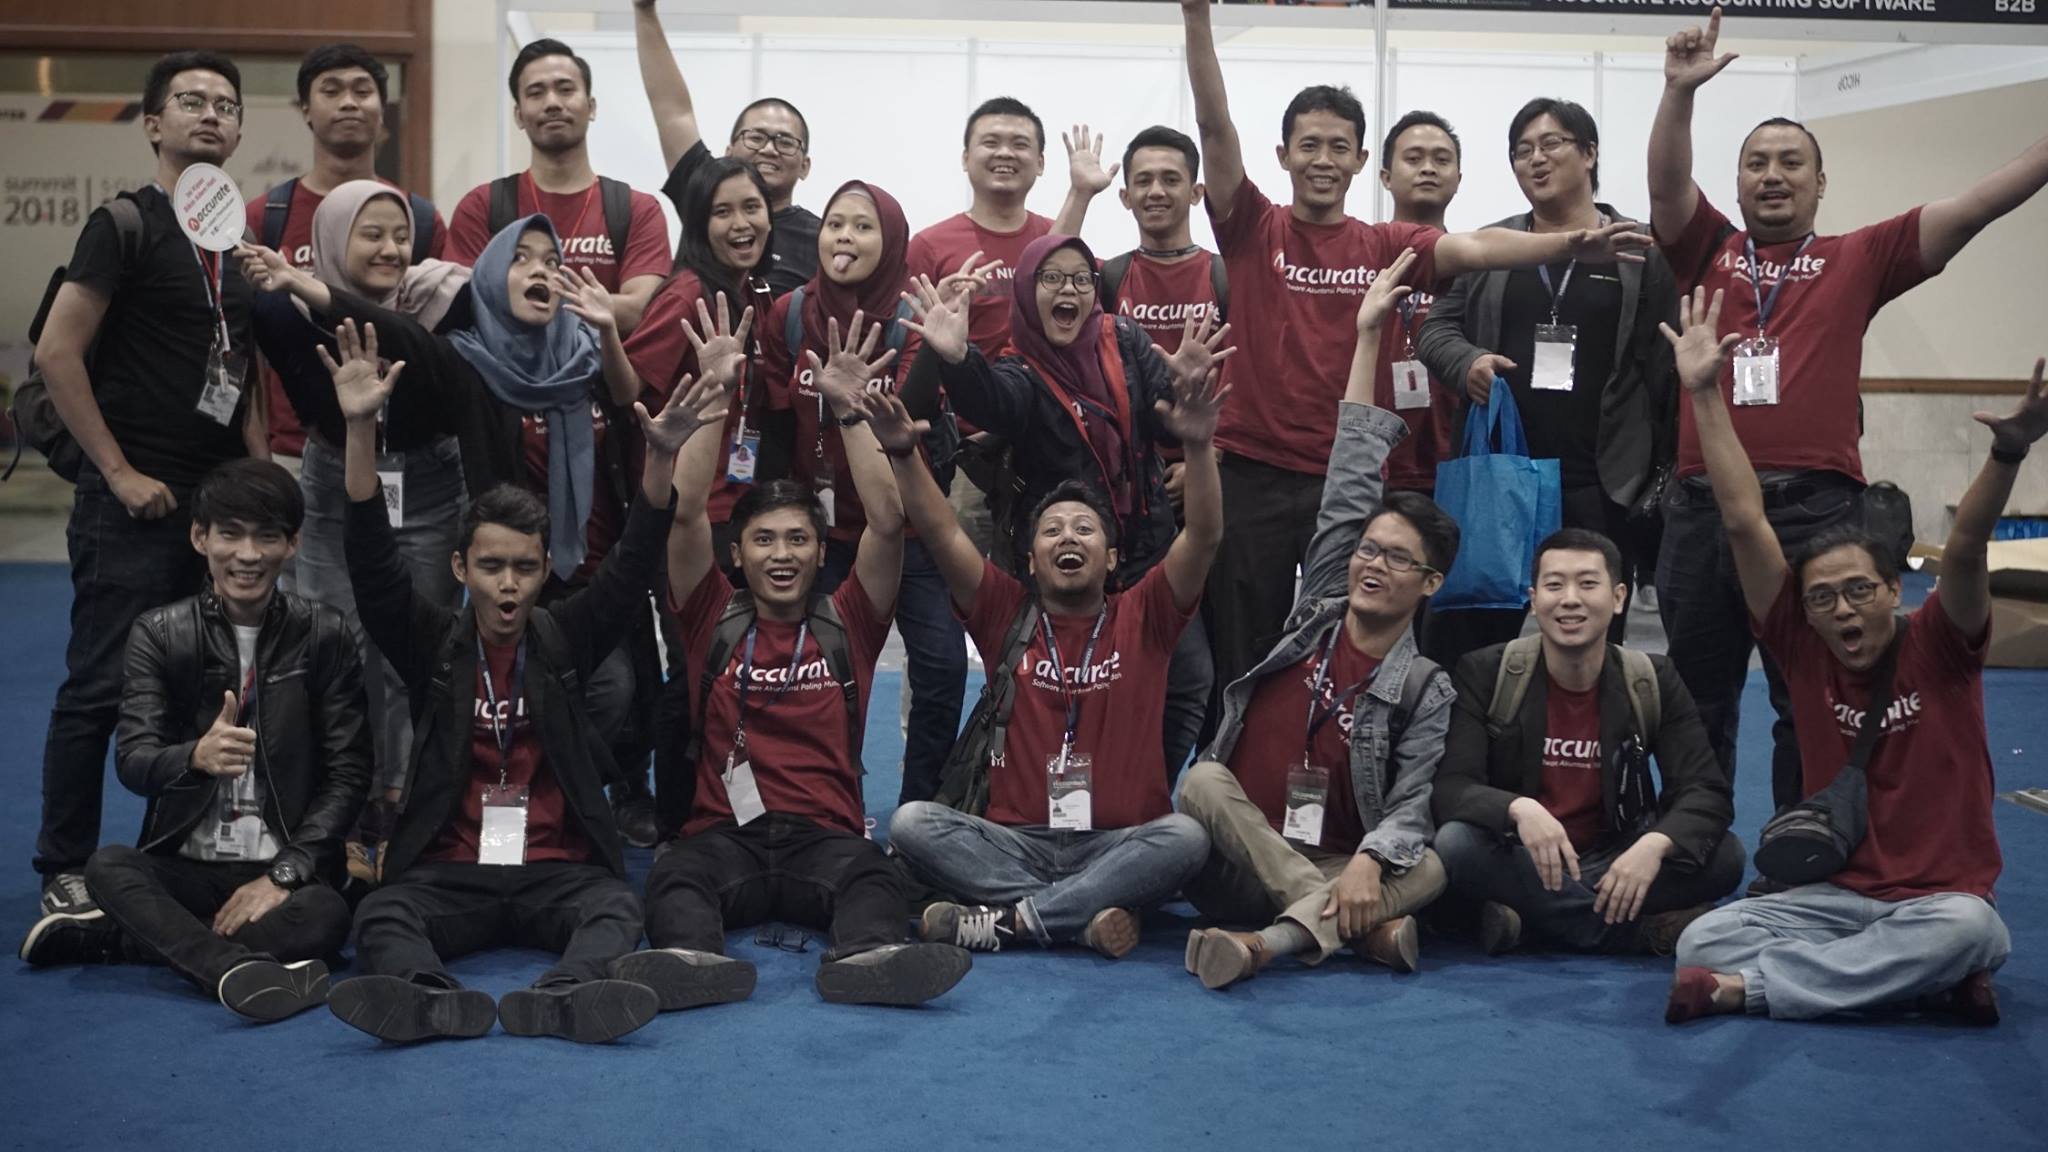 Accurate Software Indocomtech 2018